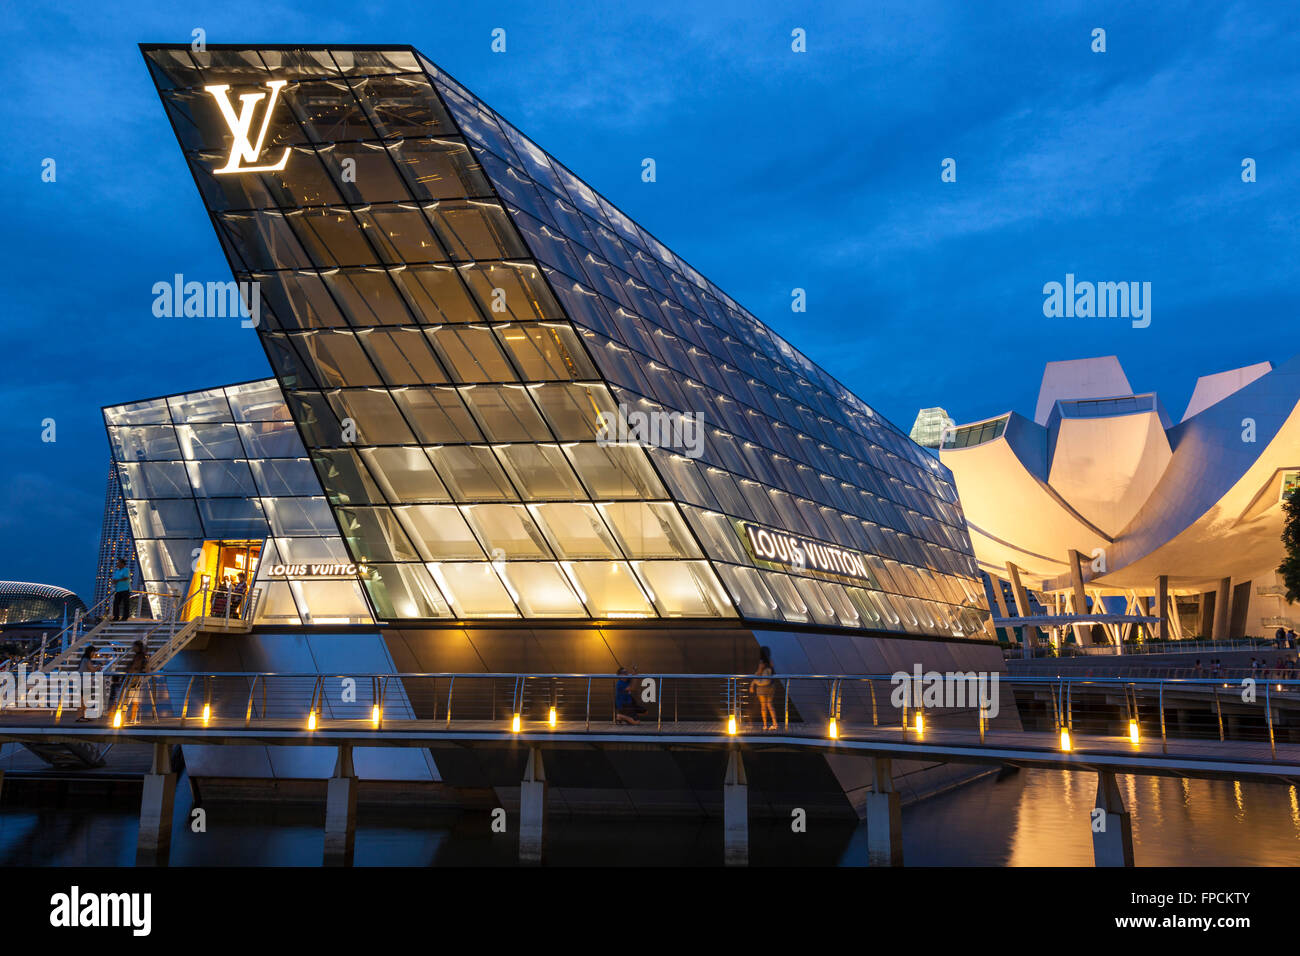 A view of the Louis Vuitton Island Maison in Singapore, the